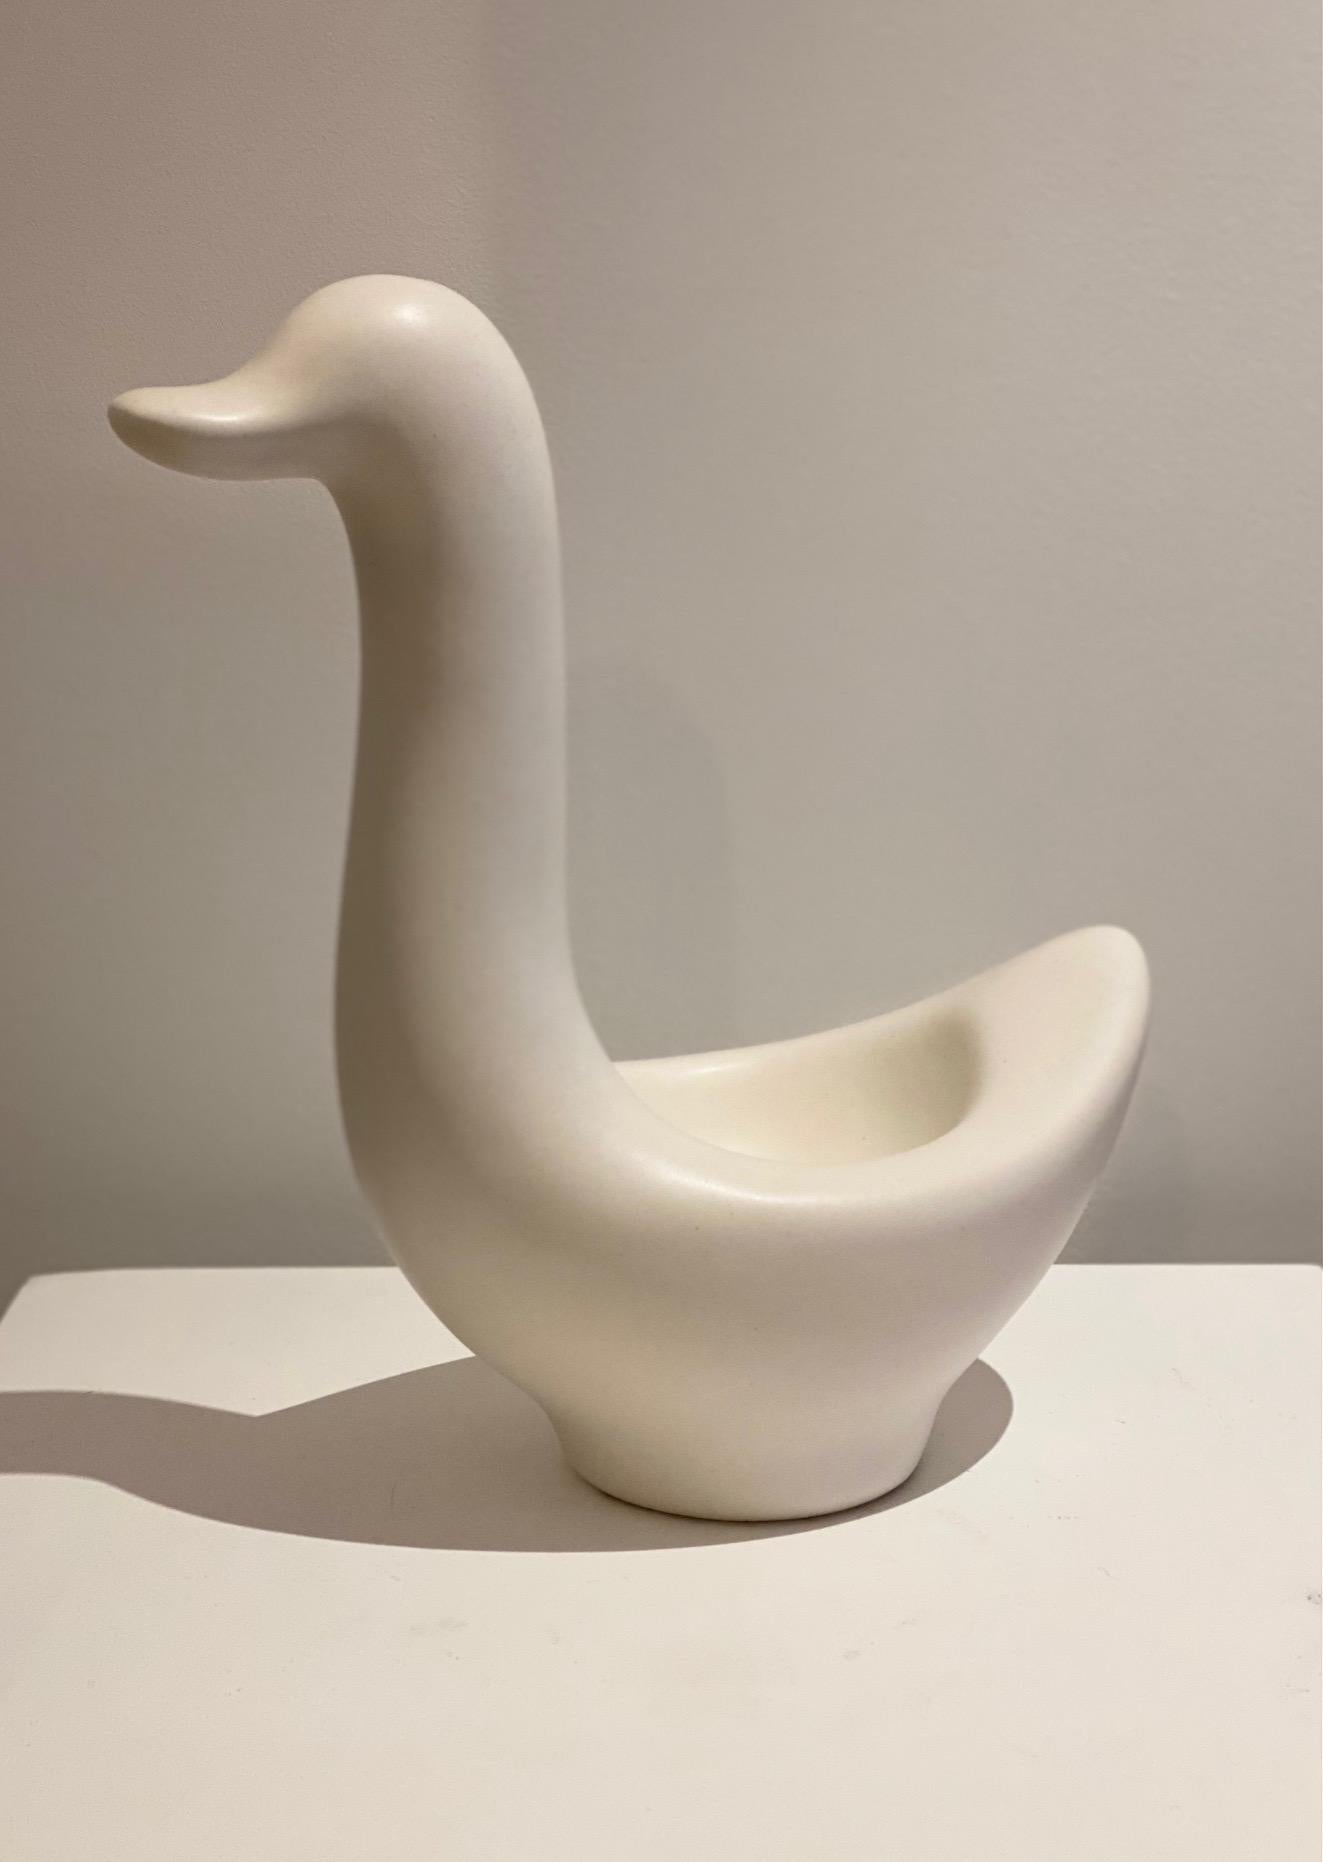 Ceramic Pair of Black and White Swans by André Baud, Vallauris, 1950s For Sale 5